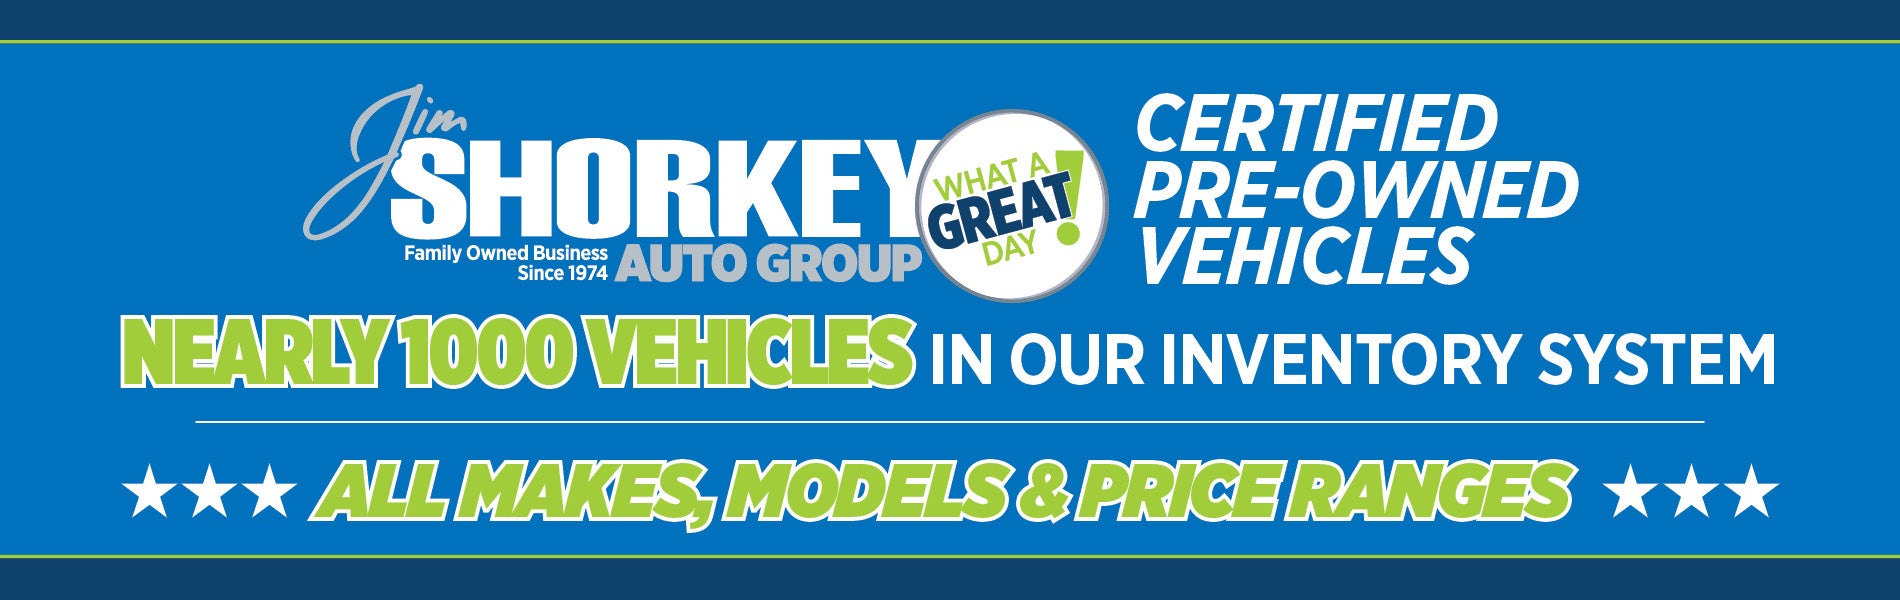 certified pre owned vehicles available click for more infor